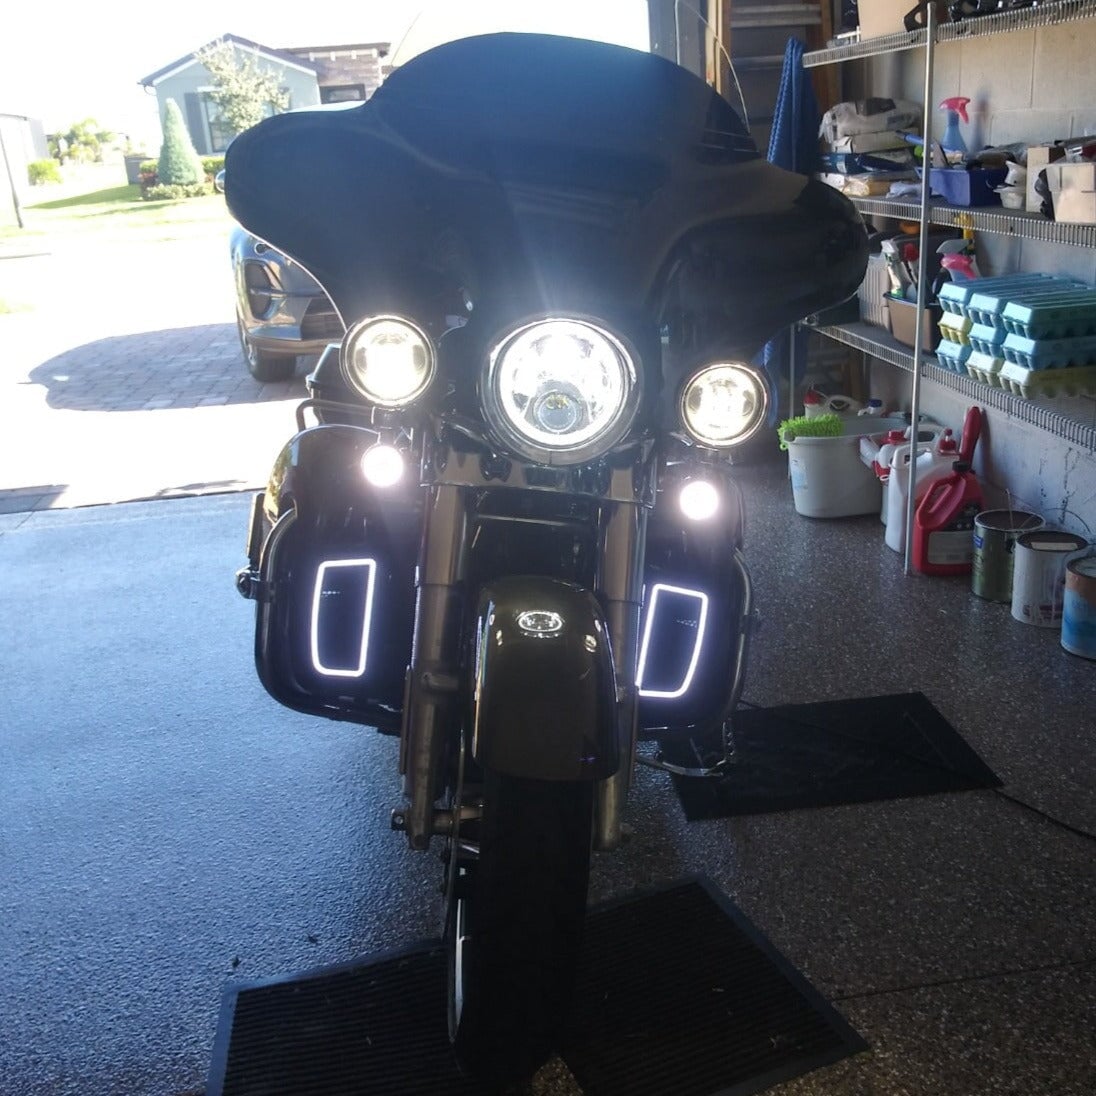 Eagle Lights 7" LED Headlight with LED Halo Ring for Harley Davidson and Indian Motorcycles - Generation II / Chrome Kit